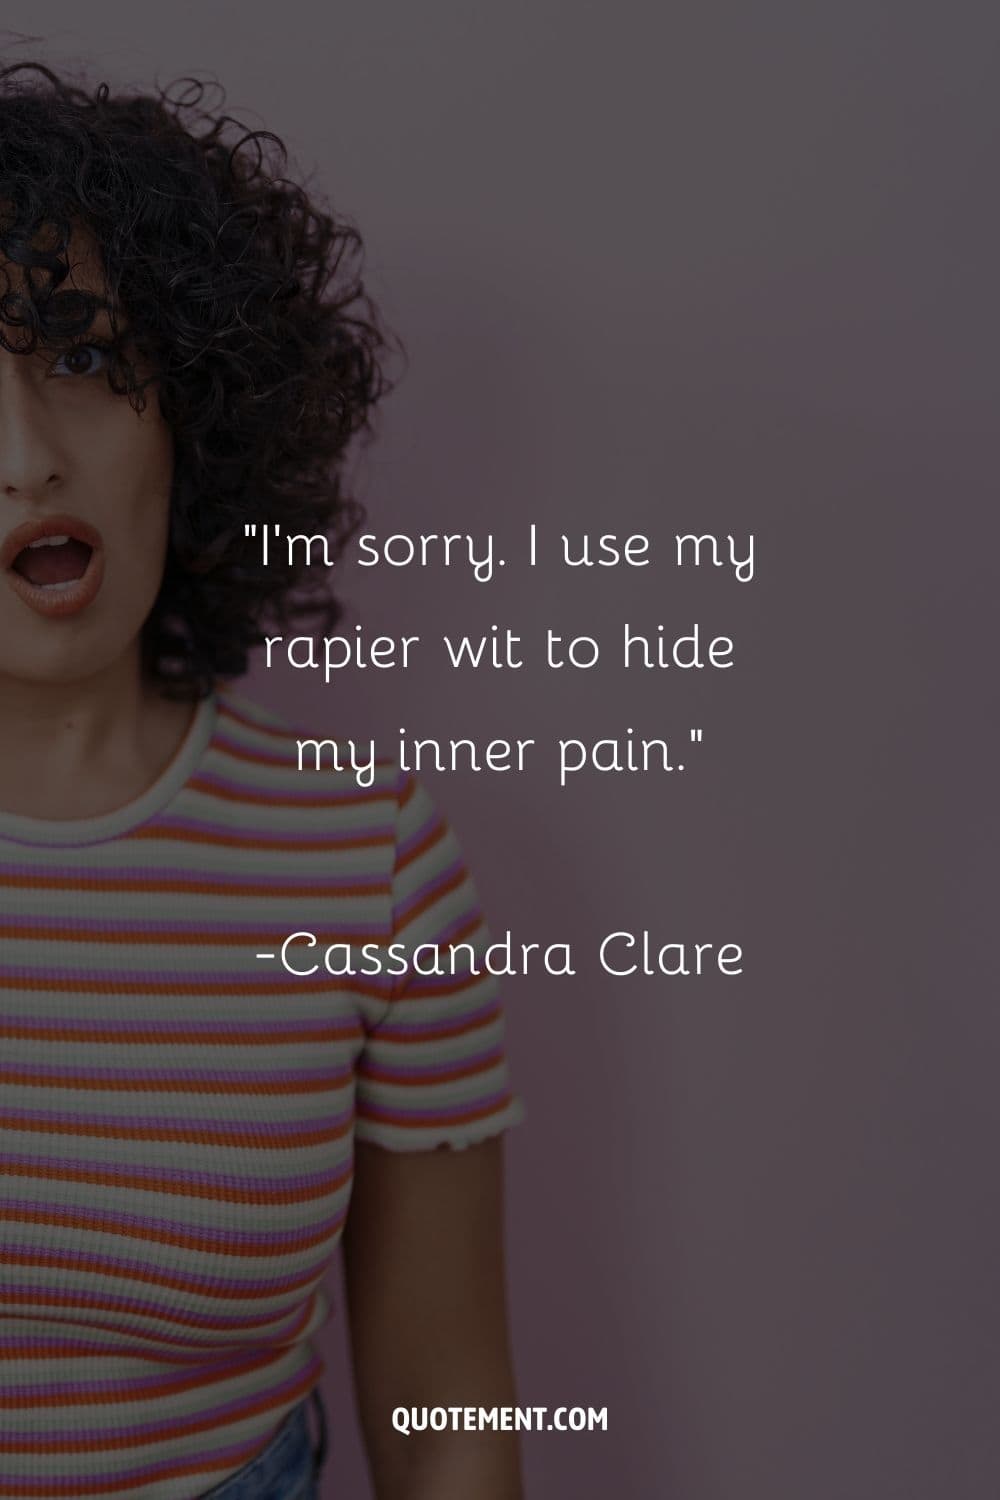 “I'm sorry. I use my rapier wit to hide my inner pain.” ― Cassandra Clare